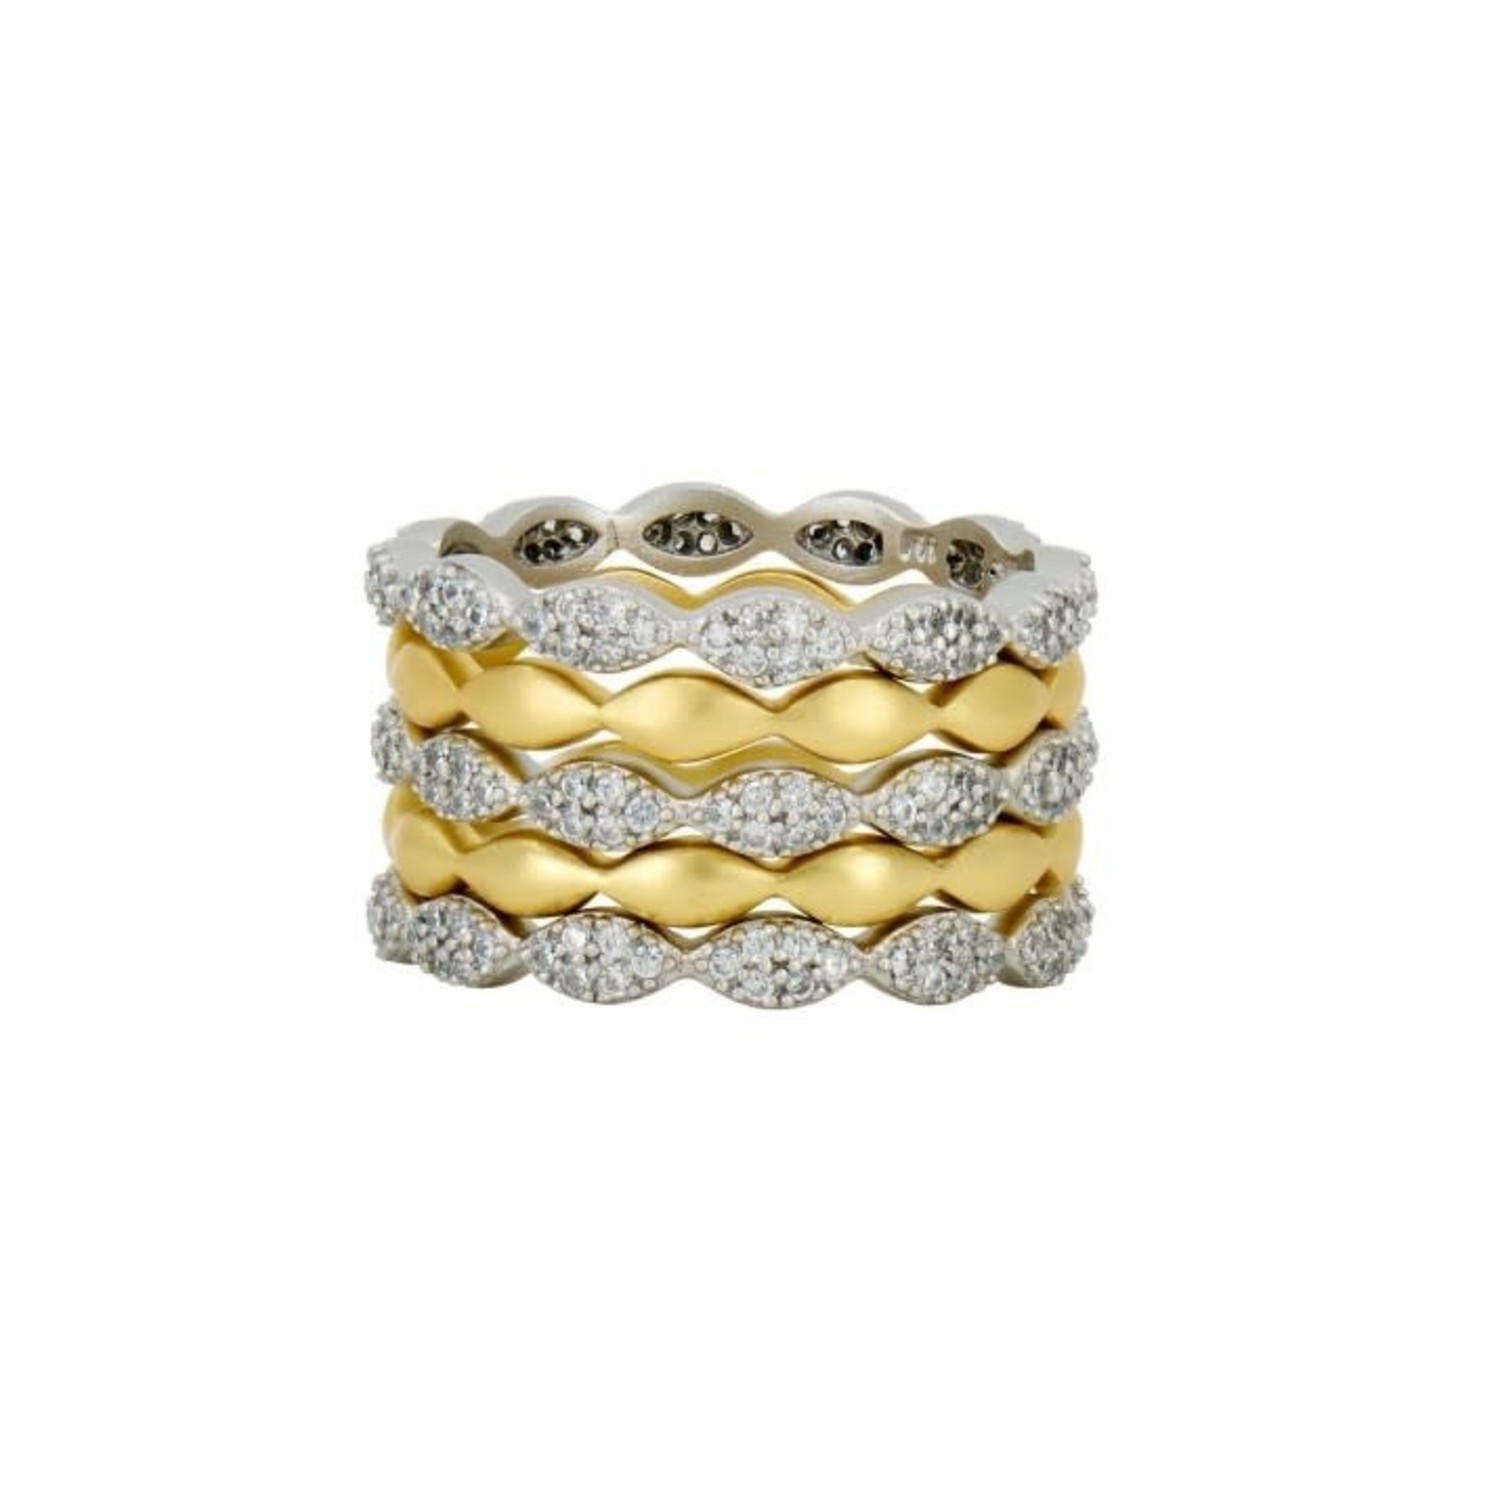 Layers of Armor 5-stack Ring S8 - Southern Avenue Company